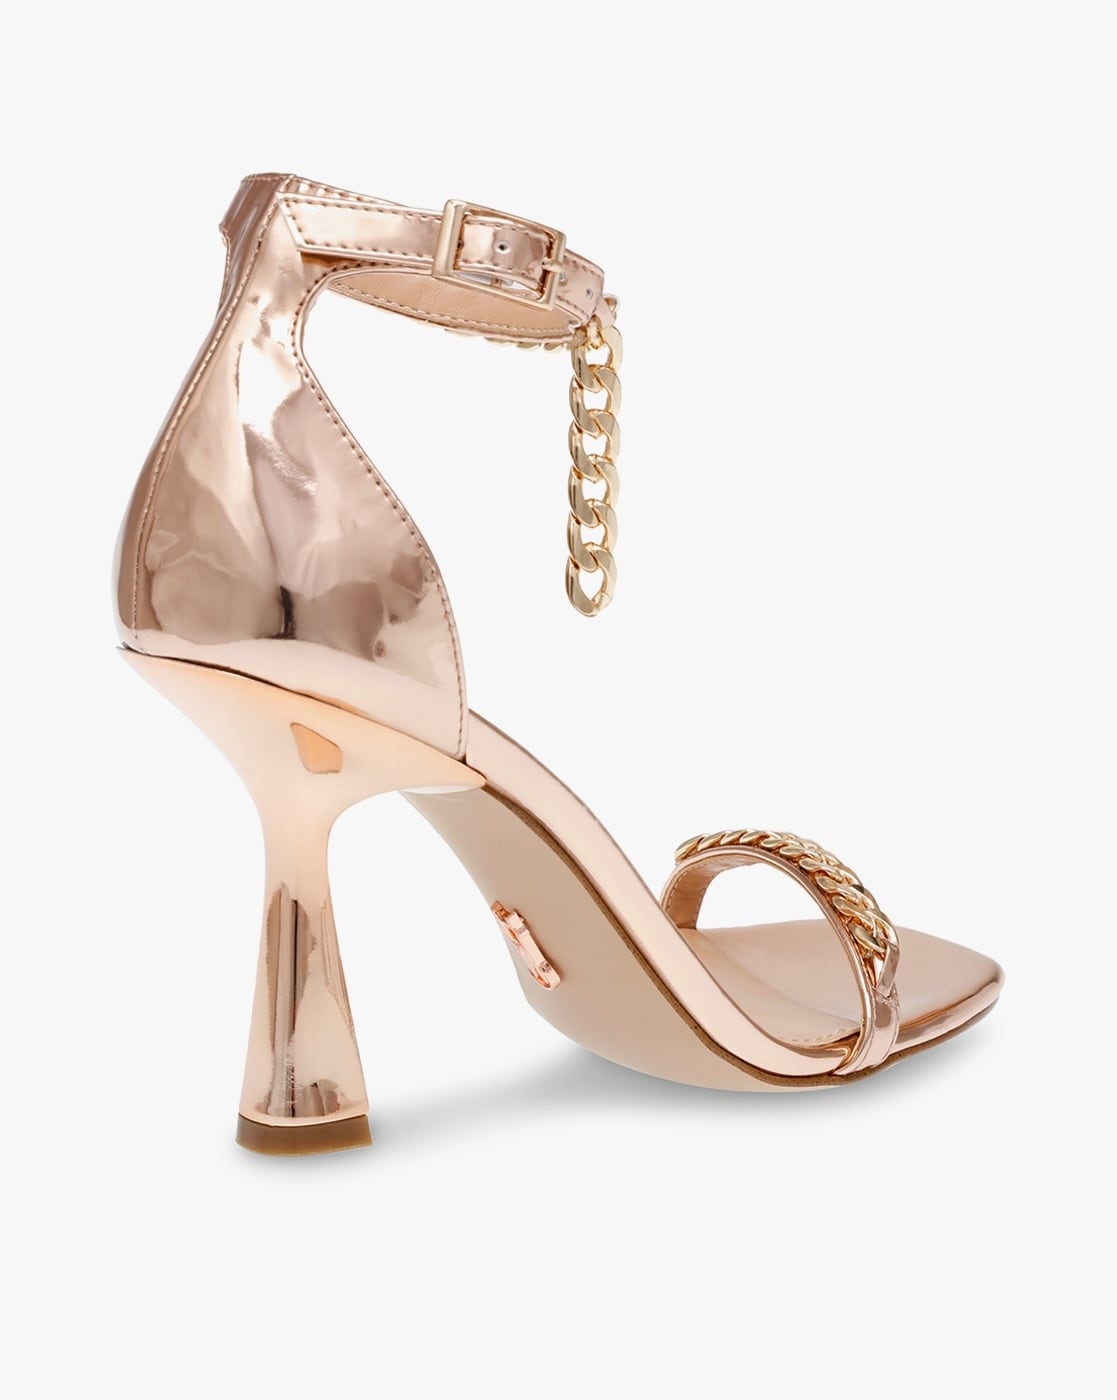 Sparkly Rose Gold Evening Party Womens Shoes 2019 Sequins Ankle Strap  Rhinestone 9 cm Stiletto Heels Pointed Toe High Heels